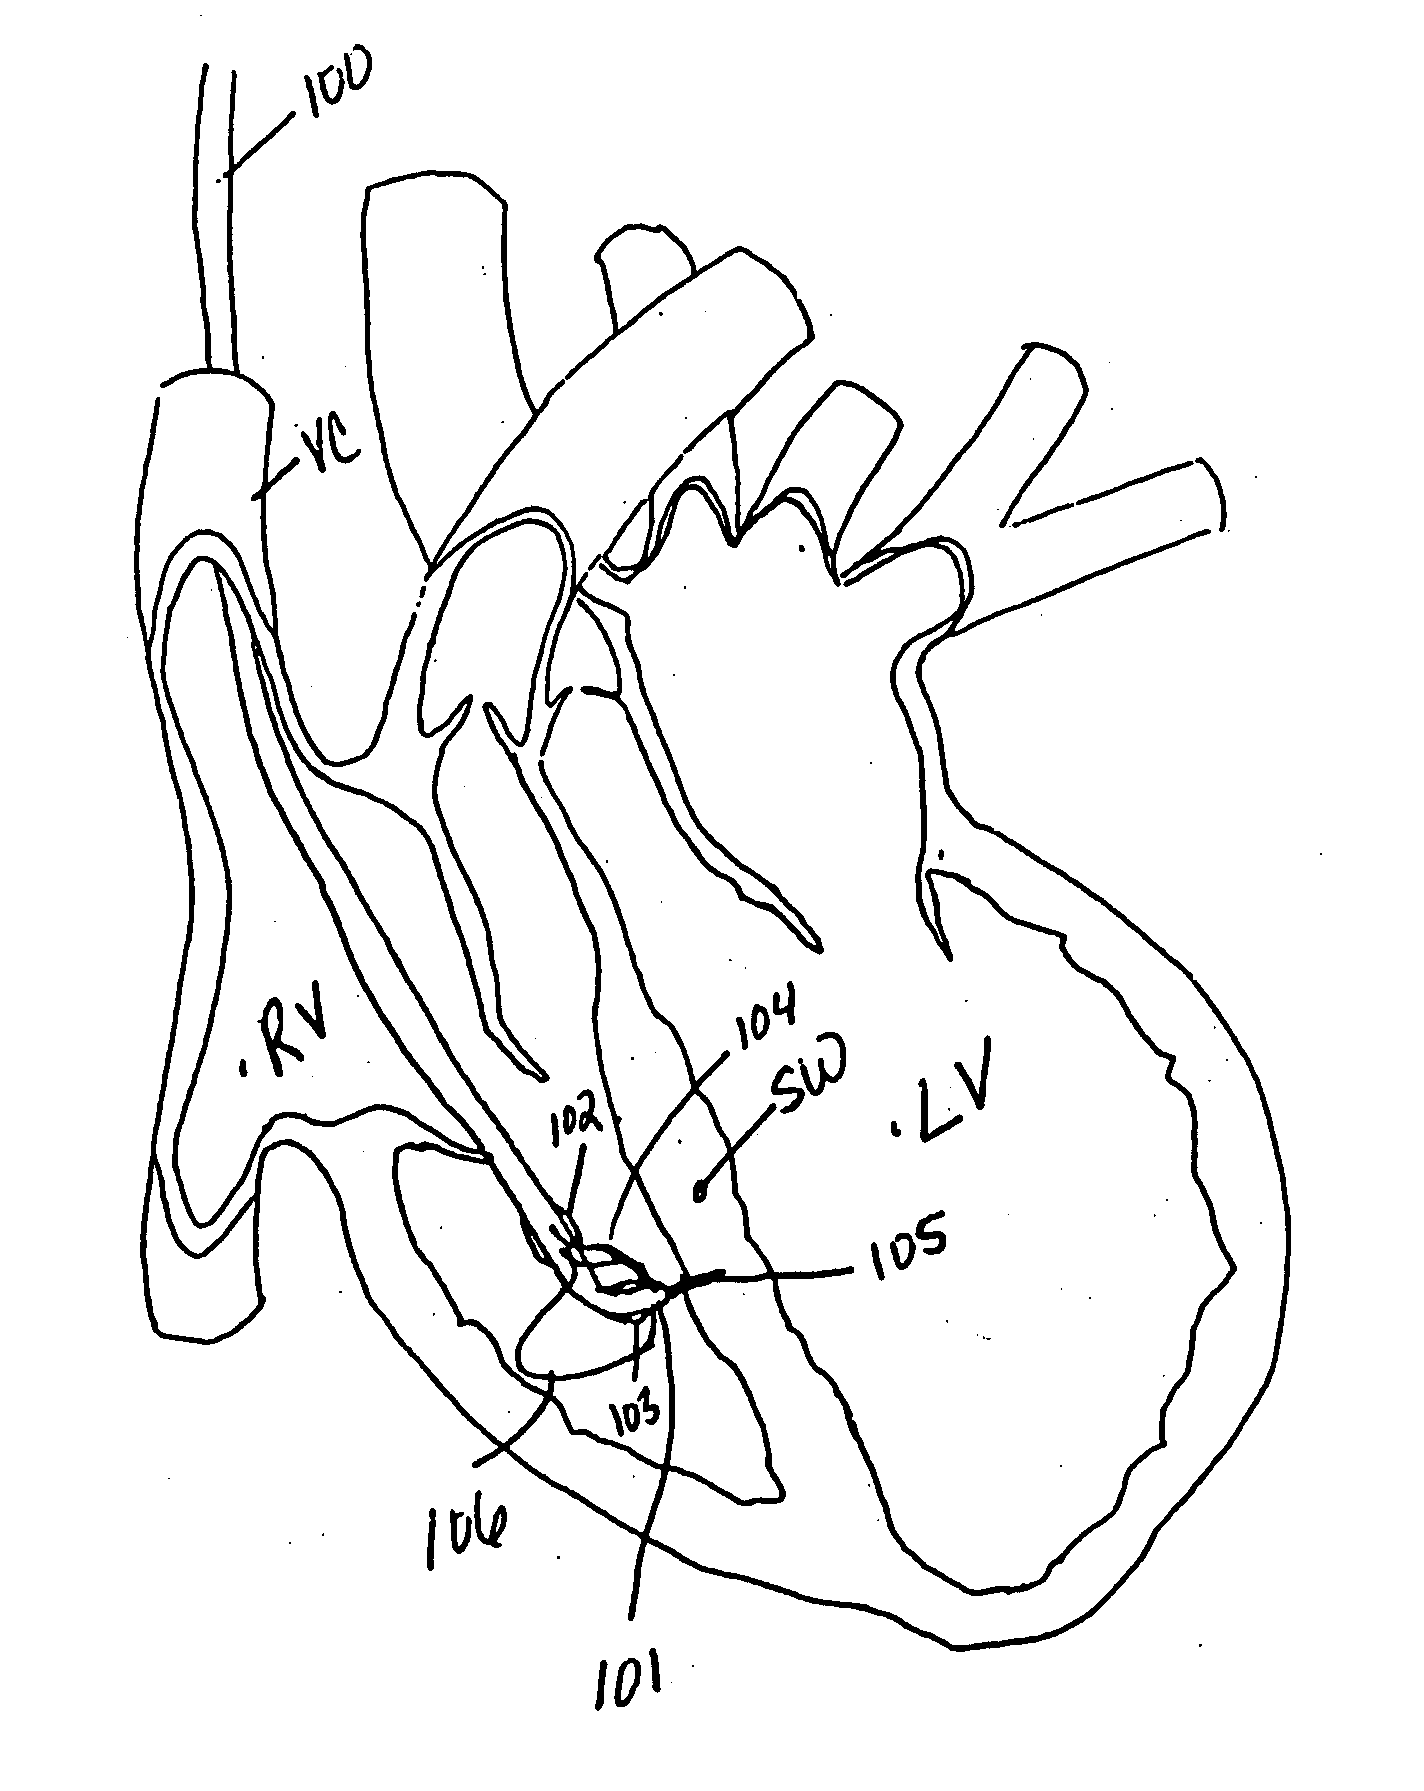 Endovascular splinting devices and methods